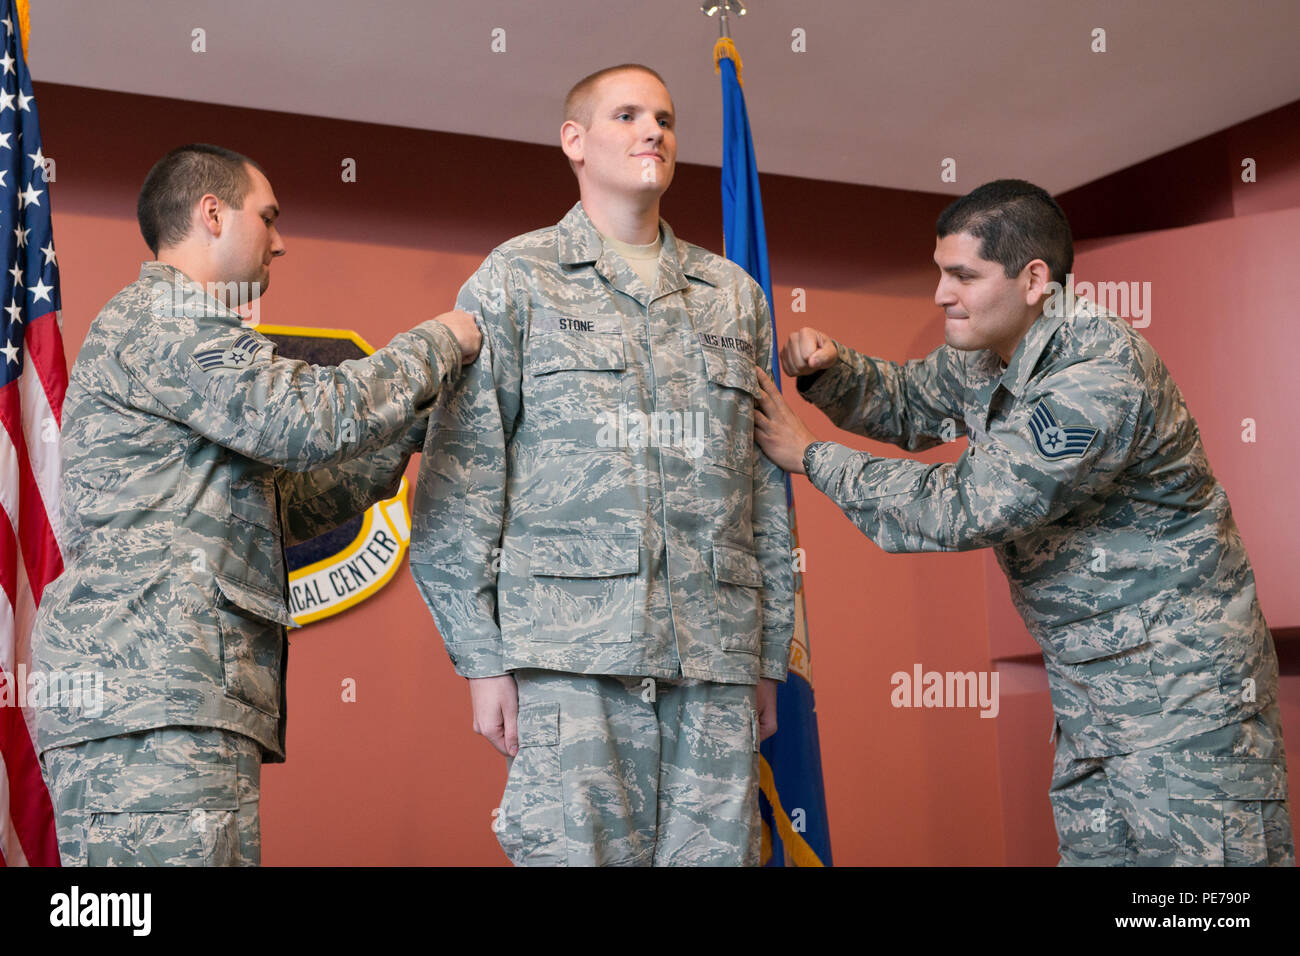 Senior Airman Benjamin Kovacevic, 60th Medical Group, left, and Staff Sgt. Roberto Davila, 60th Medical Group, right, tack senior airman stripes onto Spencer Stone, 60th Medical Operations Squadron medical technician, during a promotion ceremony at Travis Air Force Base, Calif., Oct. 30, 2015. Following his promotion to senior airman, Stone was promoted to the rank of staff sergeant by order of Air Force Chief of Staff Gen. Mark A. Welsh III. According to Air Force Instruction 36-502, the chief of staff of the Air Force has the authority to promote any enlisted member to the next higher grade. Stock Photo